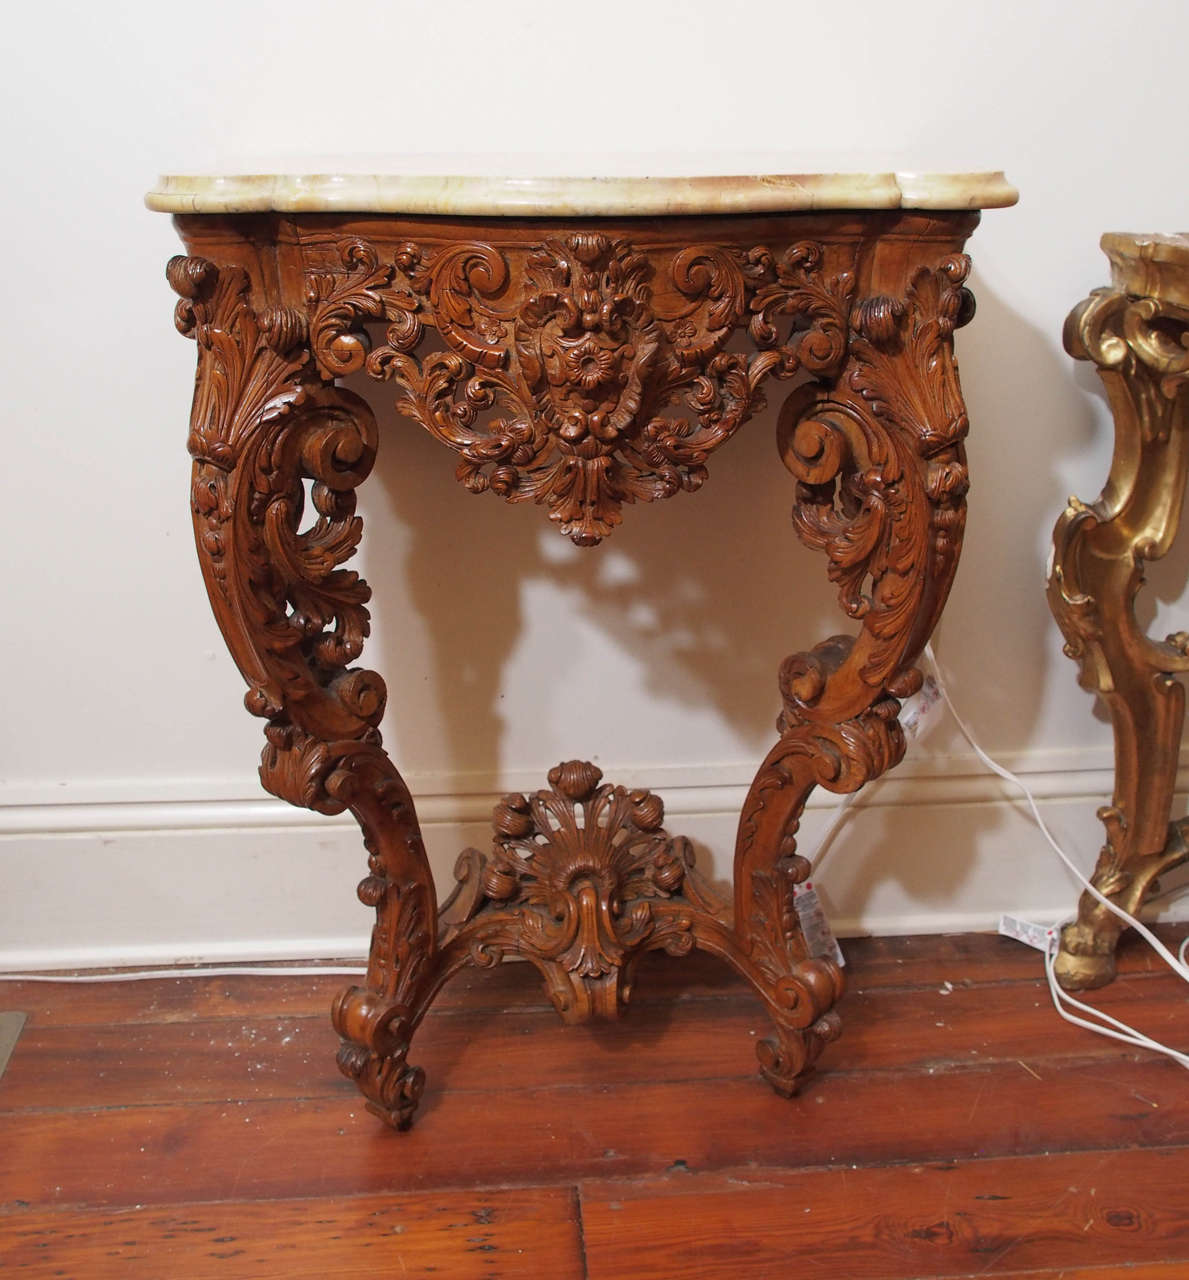 Pair of Louis XV carved walnut wall-mounted console tables with marble tops.
Having the typical rocaille motifs of the Louis XV period and Sienna marble tops.